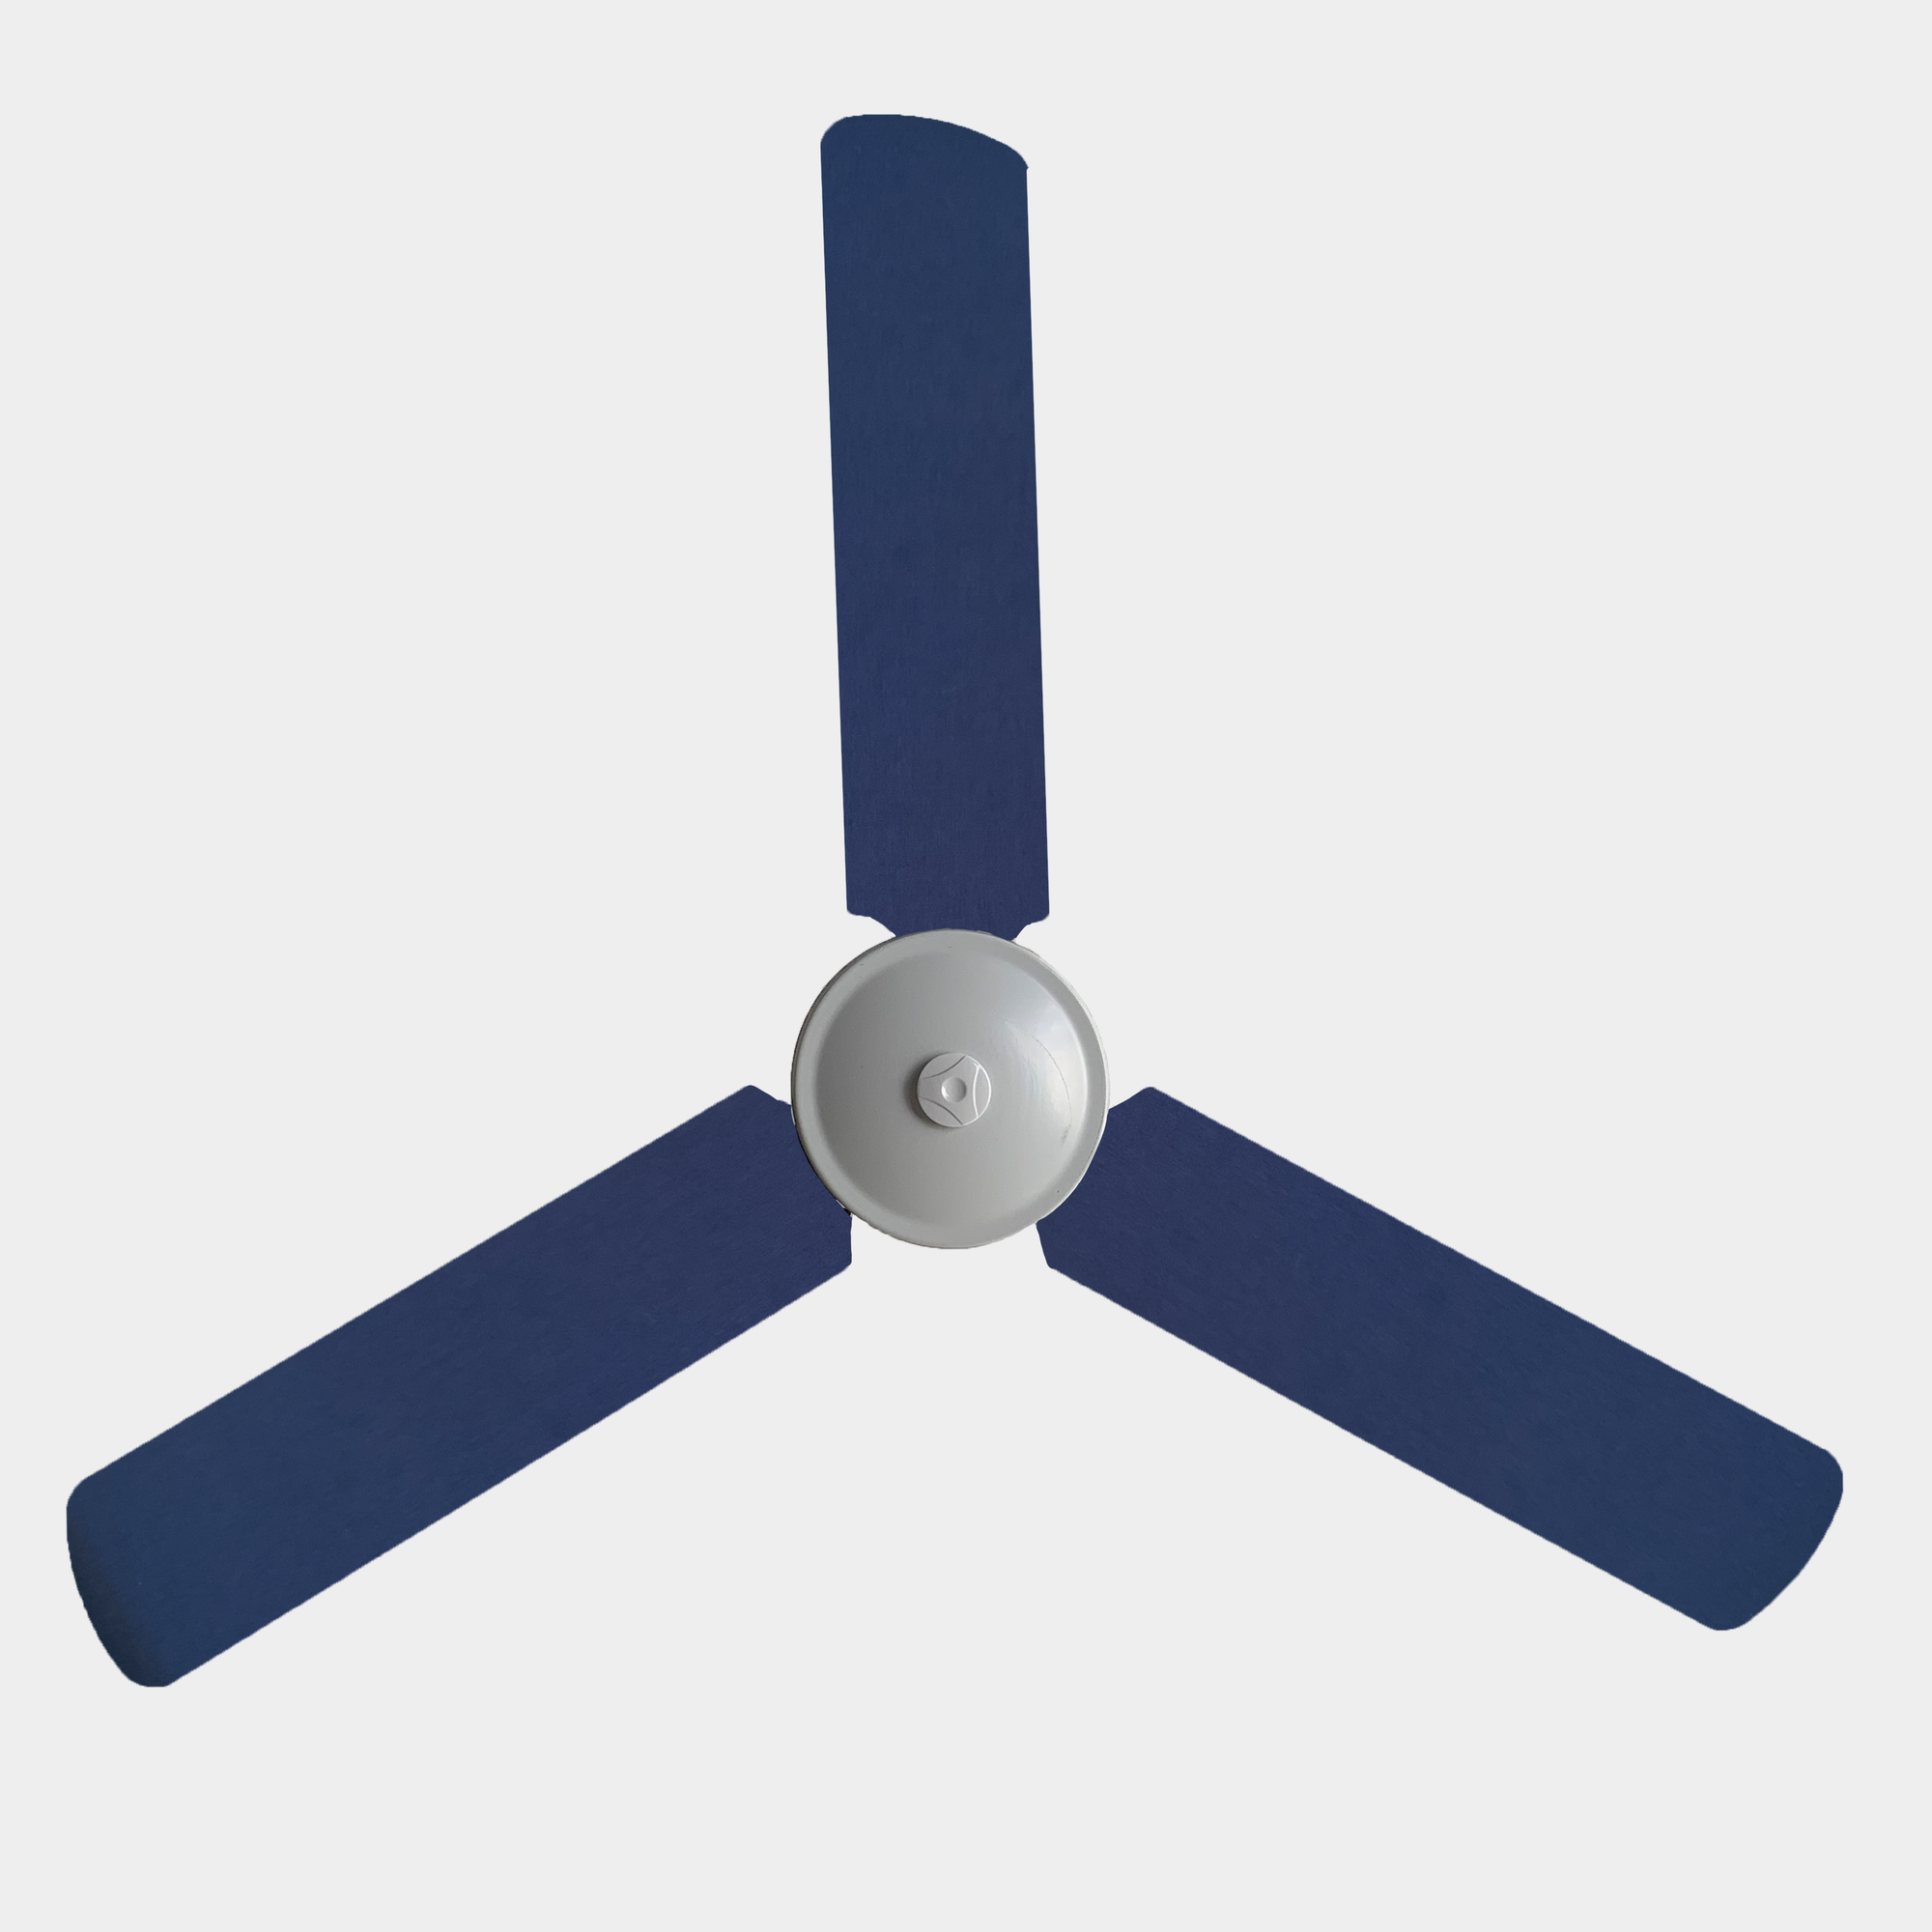 Three navy coloured fan blade covers